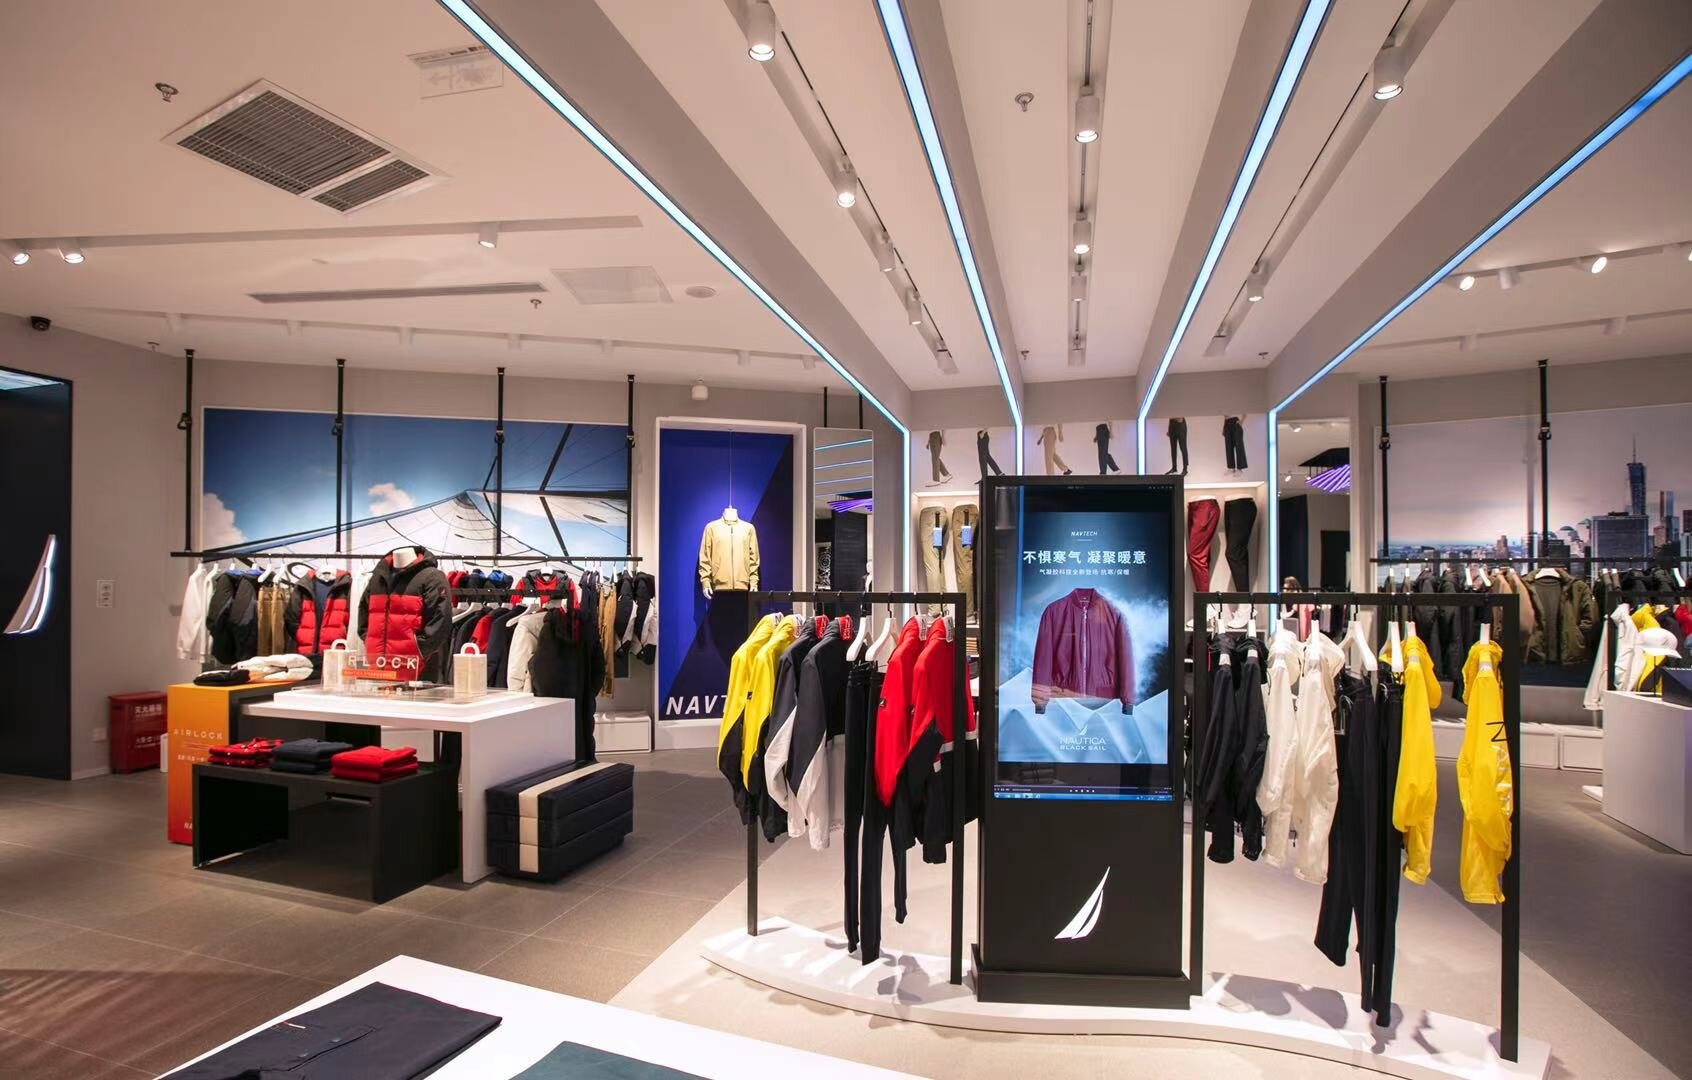 Flagship shop Nautica will be opened in Shopping and entertainment center  Respublika